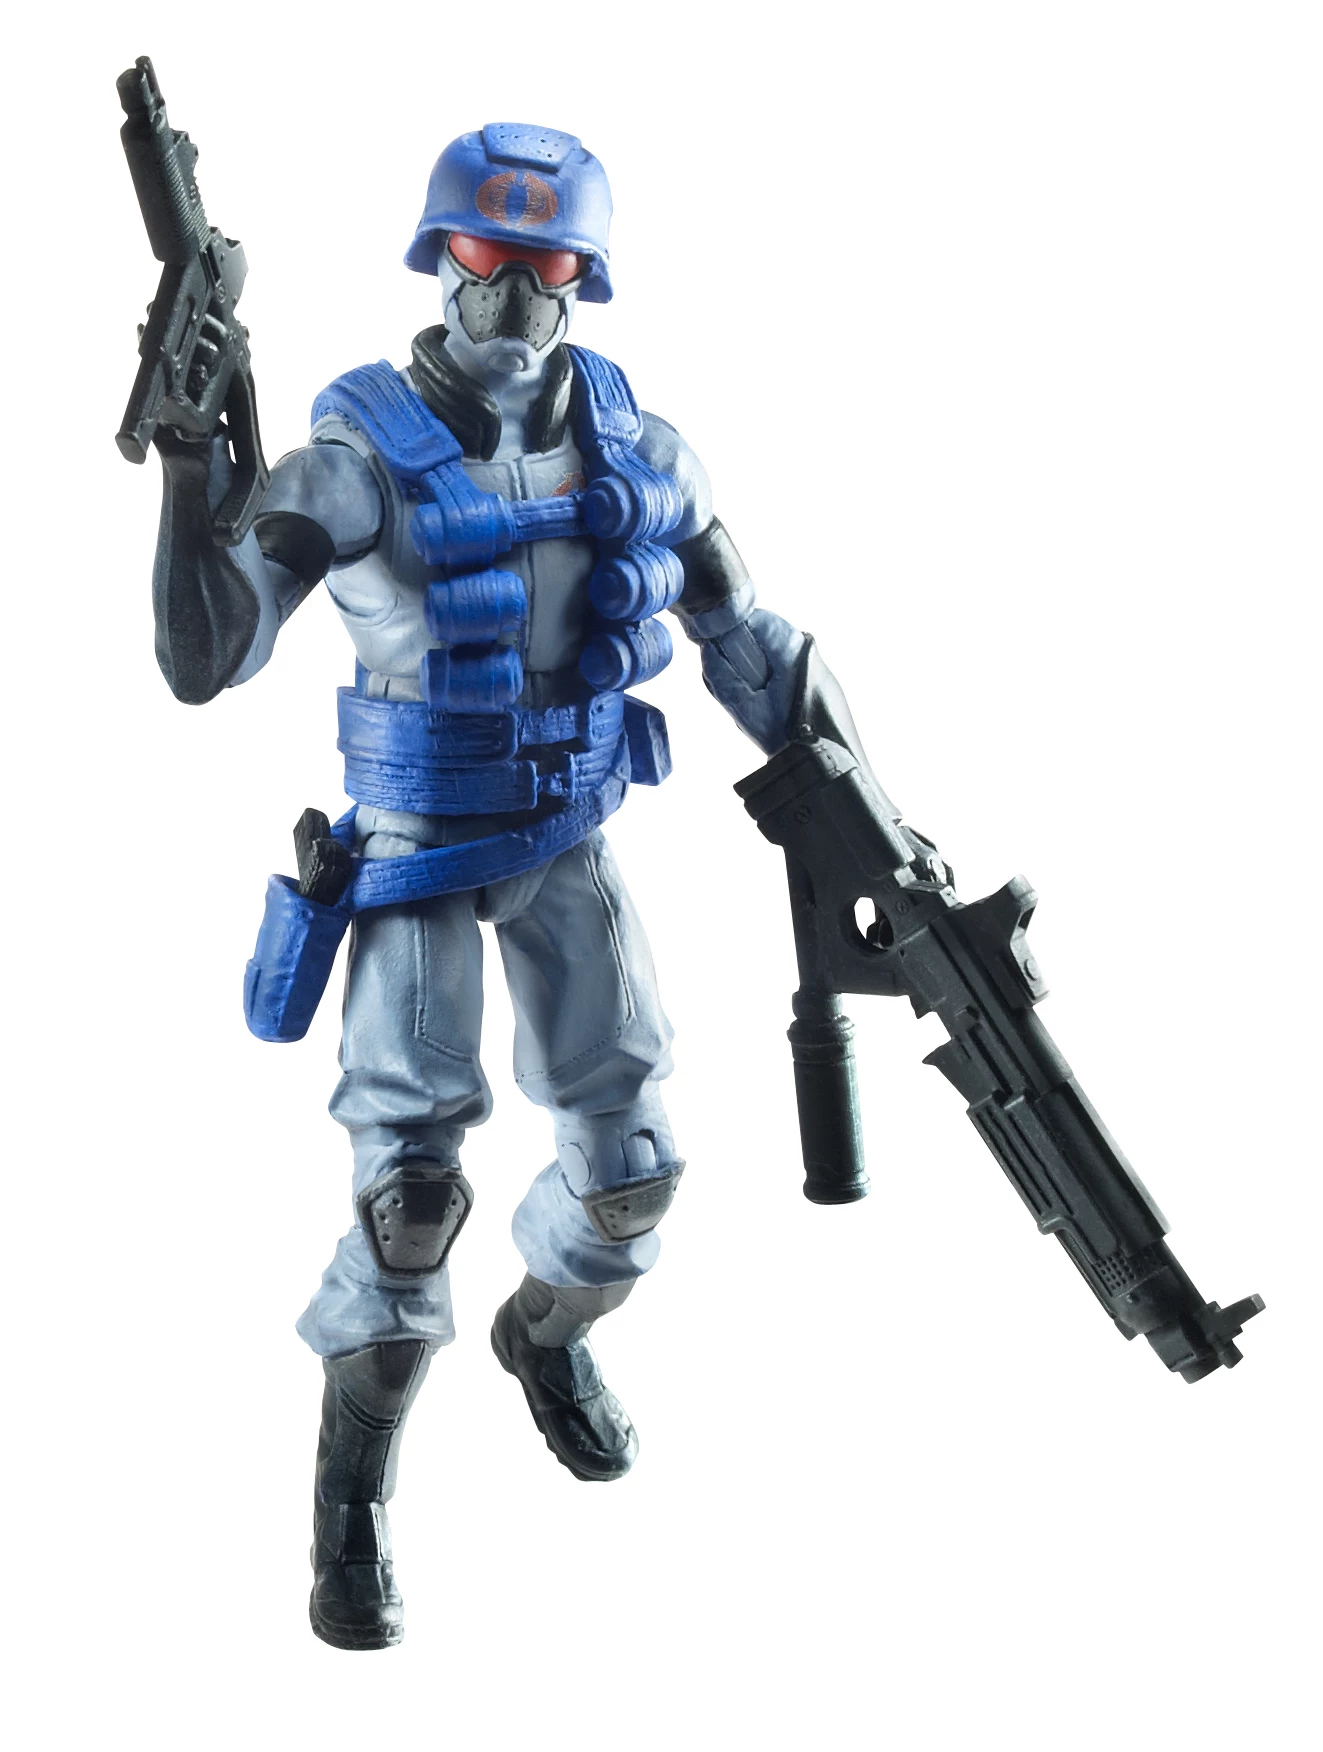 New ‘G.I. Joe: Retaliation’ Toy Images Roll Out [Toy Fair 2012]